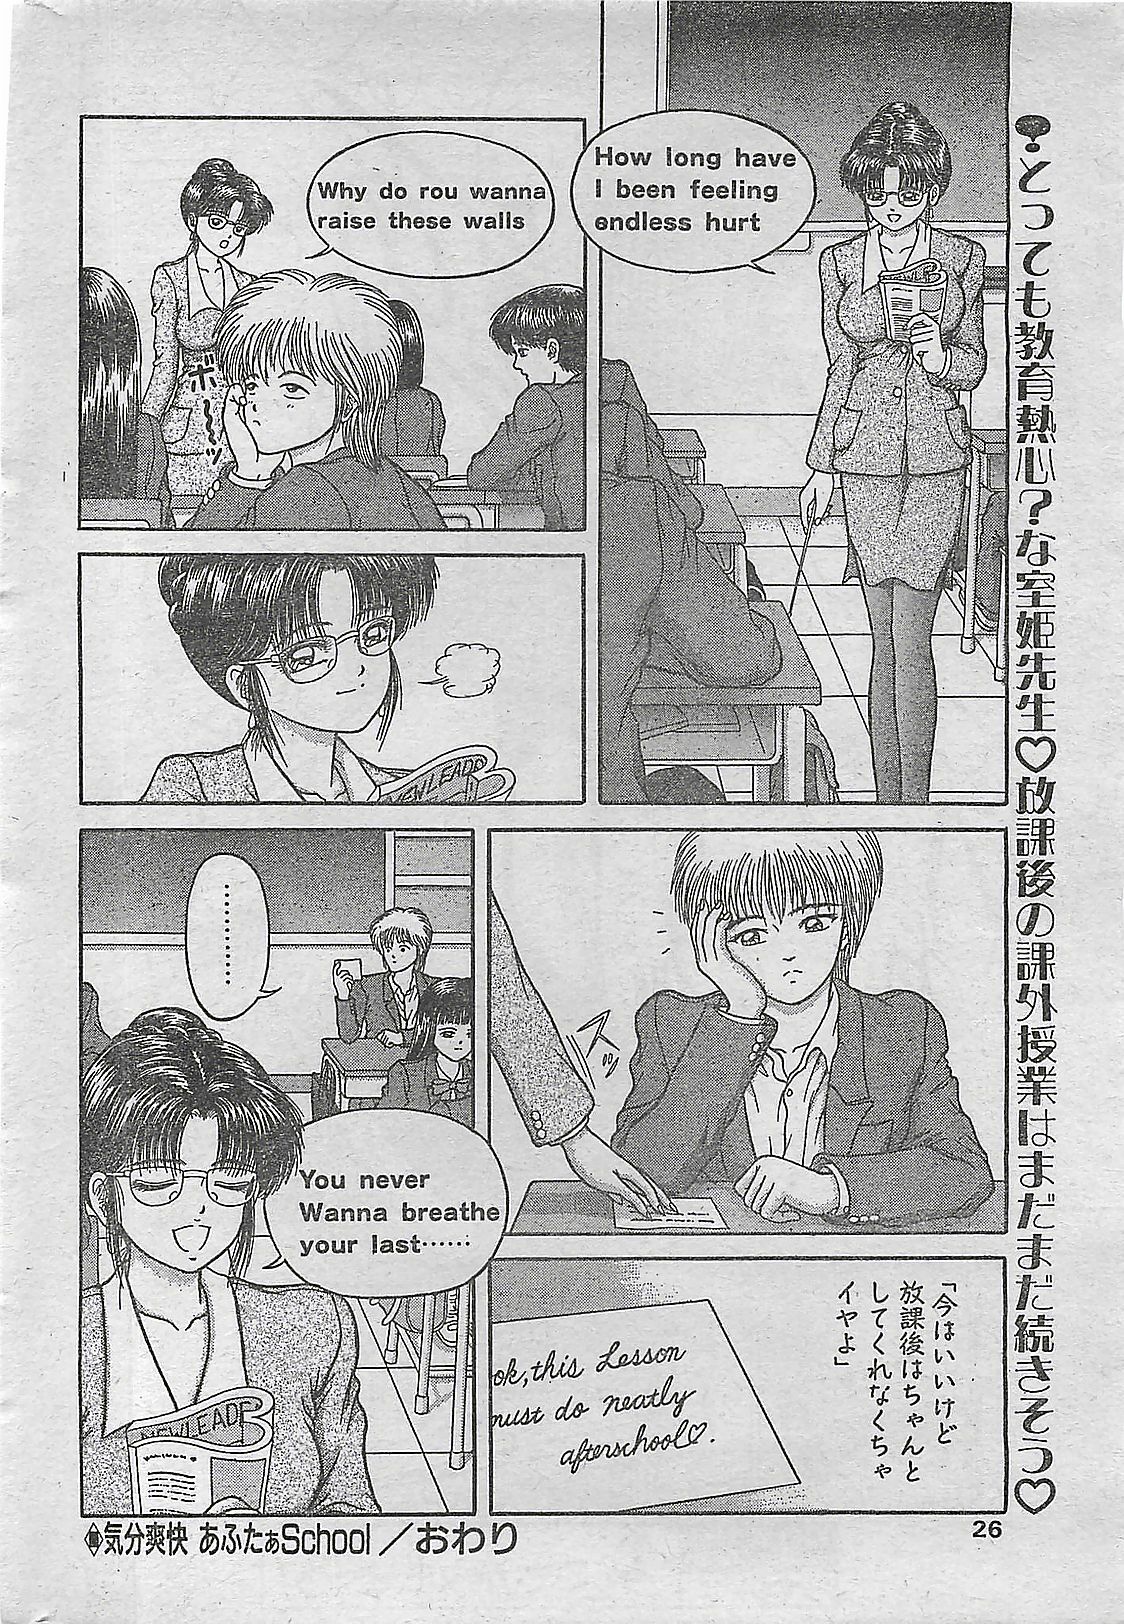 COMIC DRY-UP No.4 1995-02 page 26 full